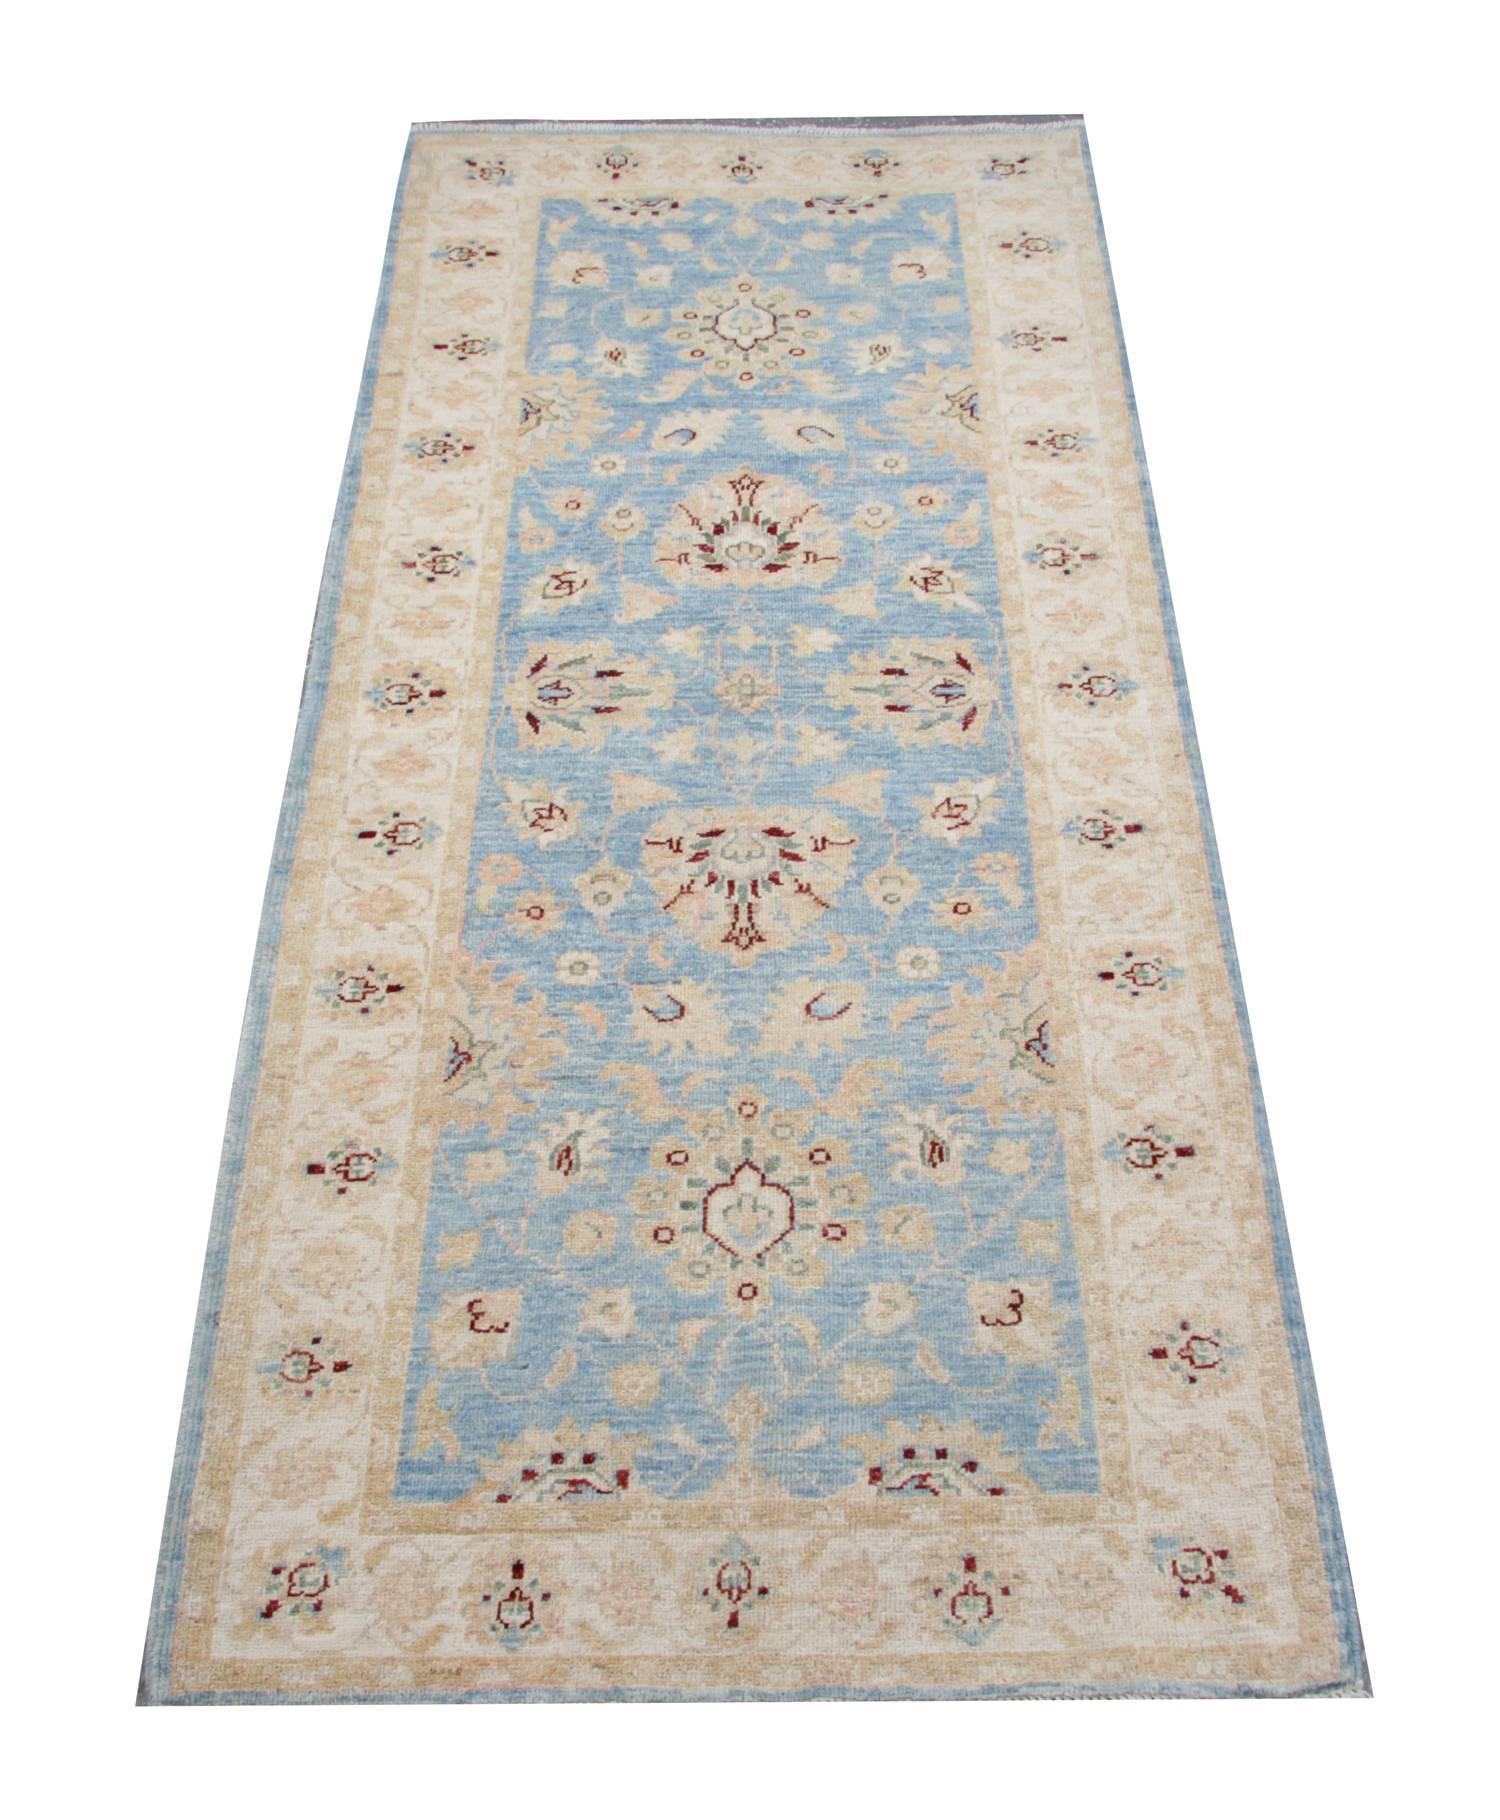 These kinds of rugs and runners are in the same style as the Ziegler Sultanabad runner made on our own looms by our master weavers in Afghanistan; this blue rug runner is made with all-natural vegetable dyes all handmade wool rugs. The large-scale